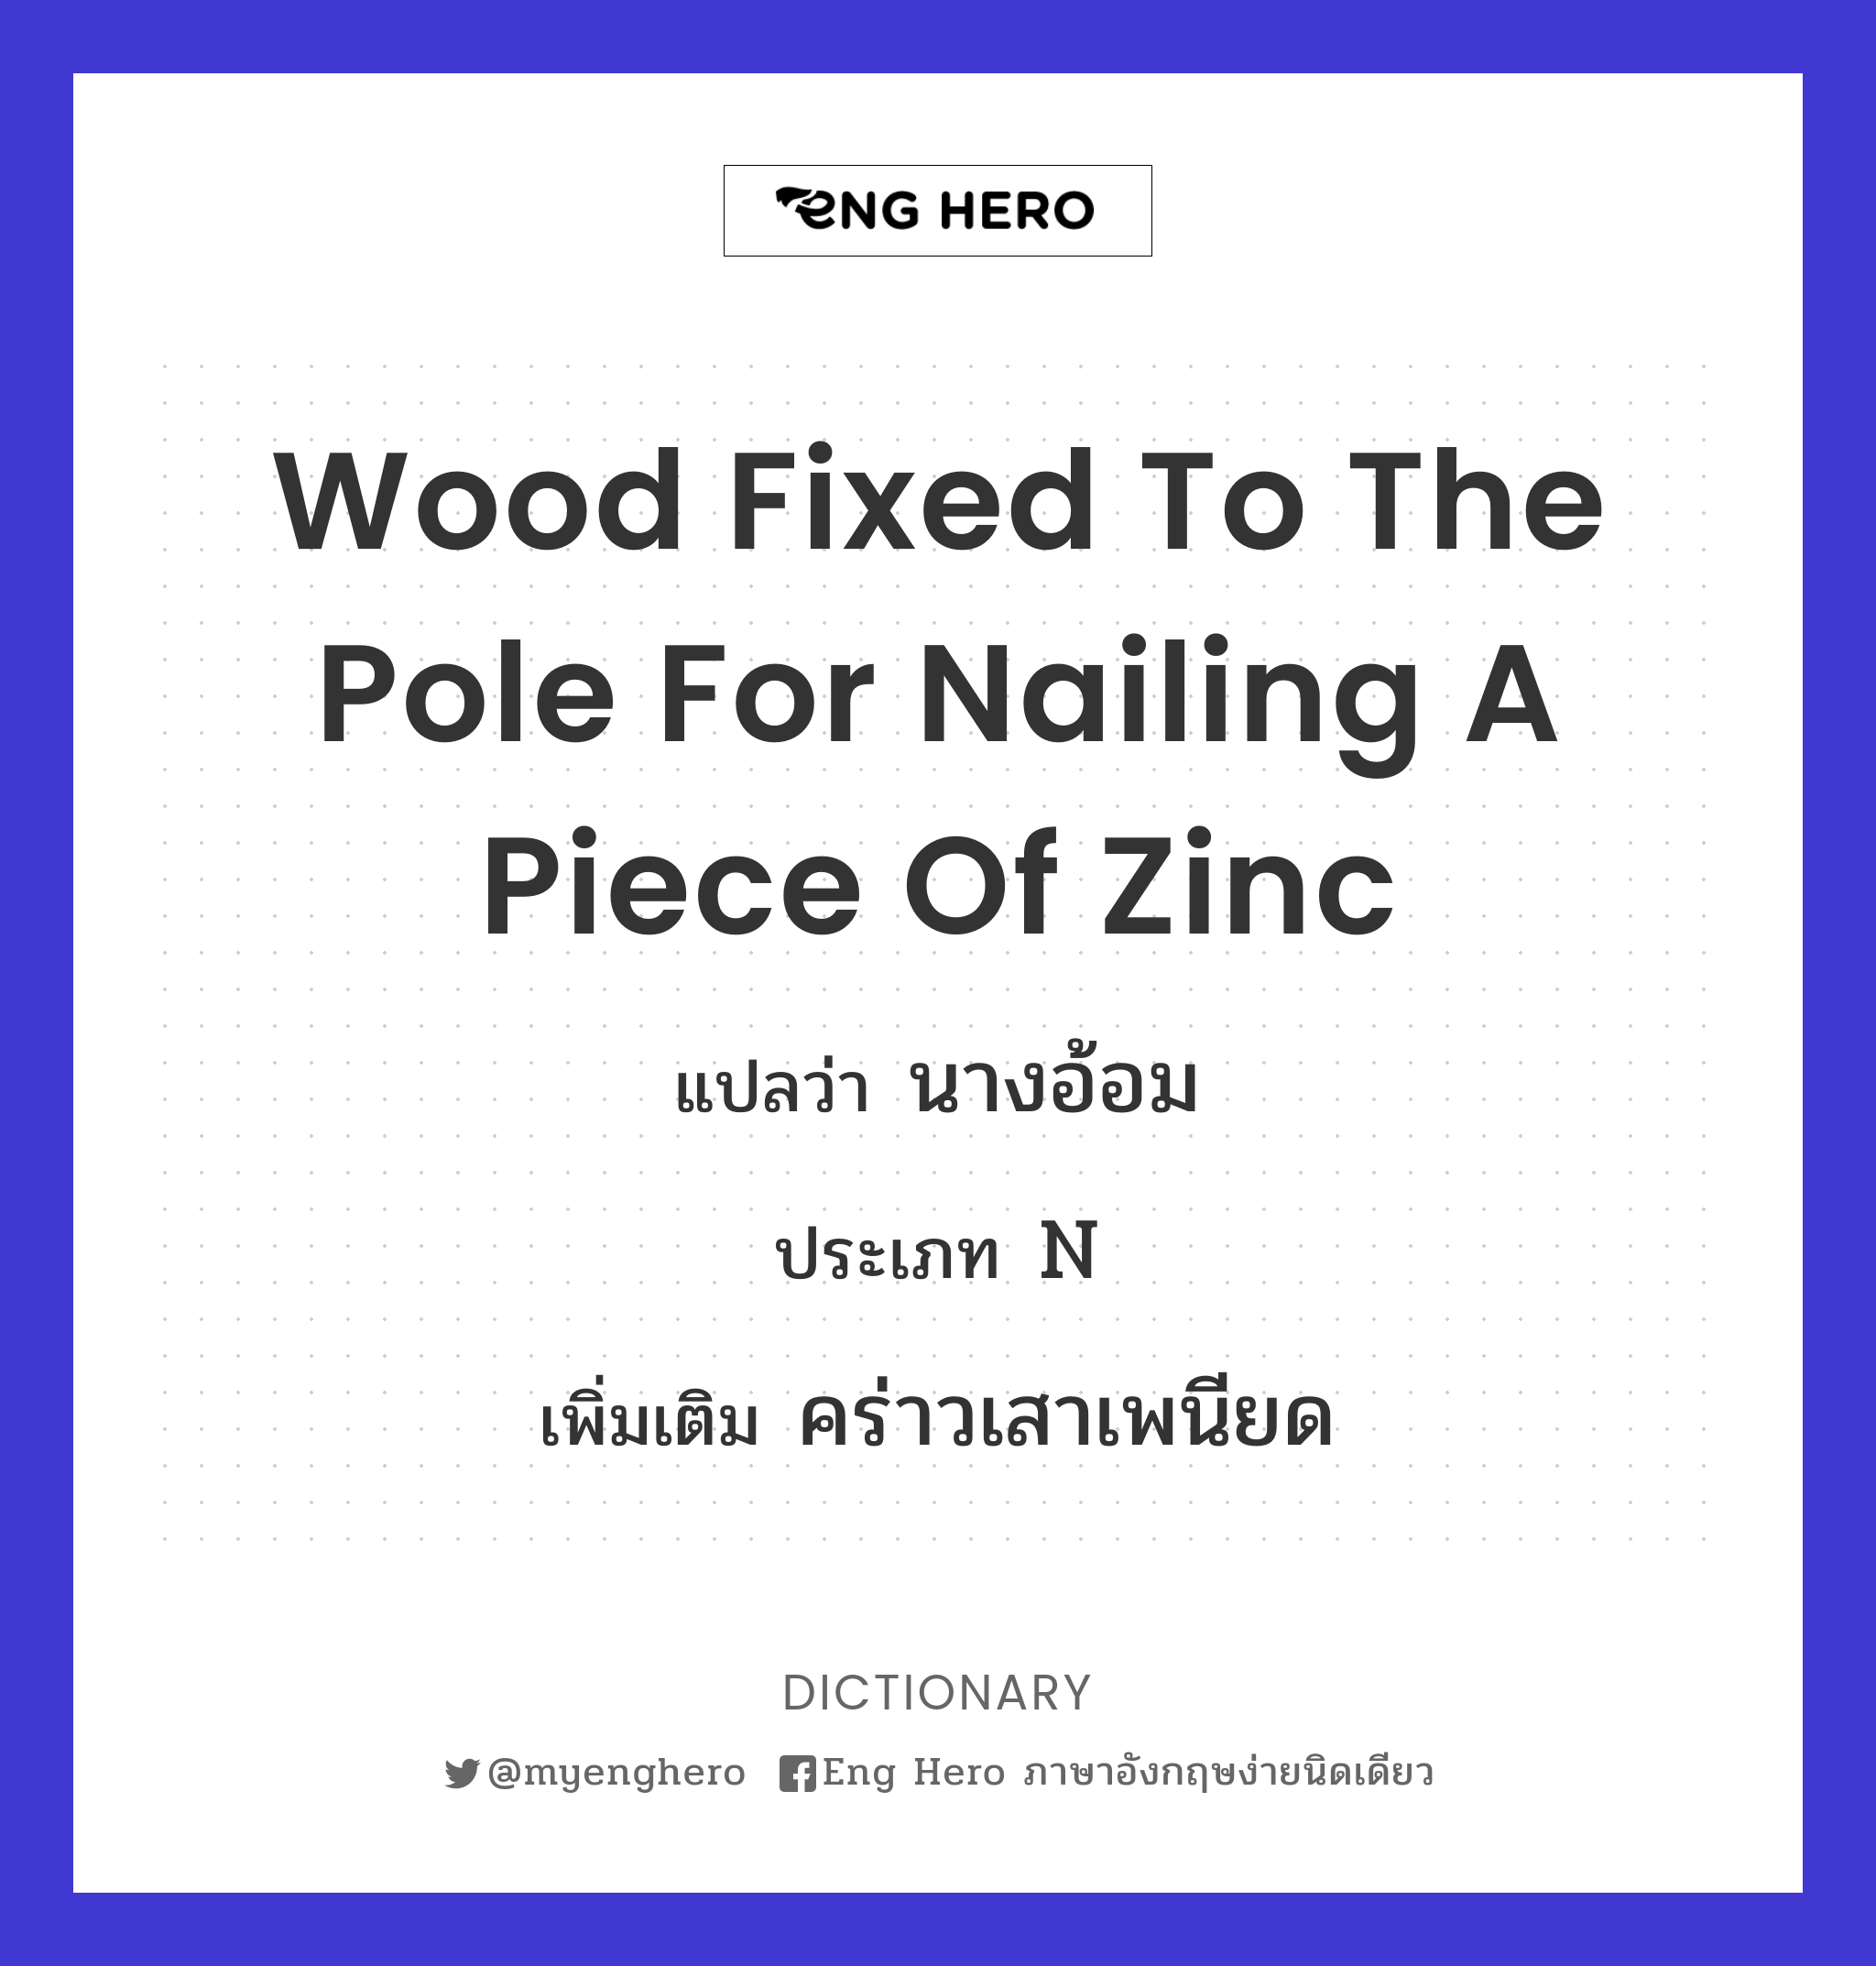 wood fixed to the pole for nailing a piece of zinc